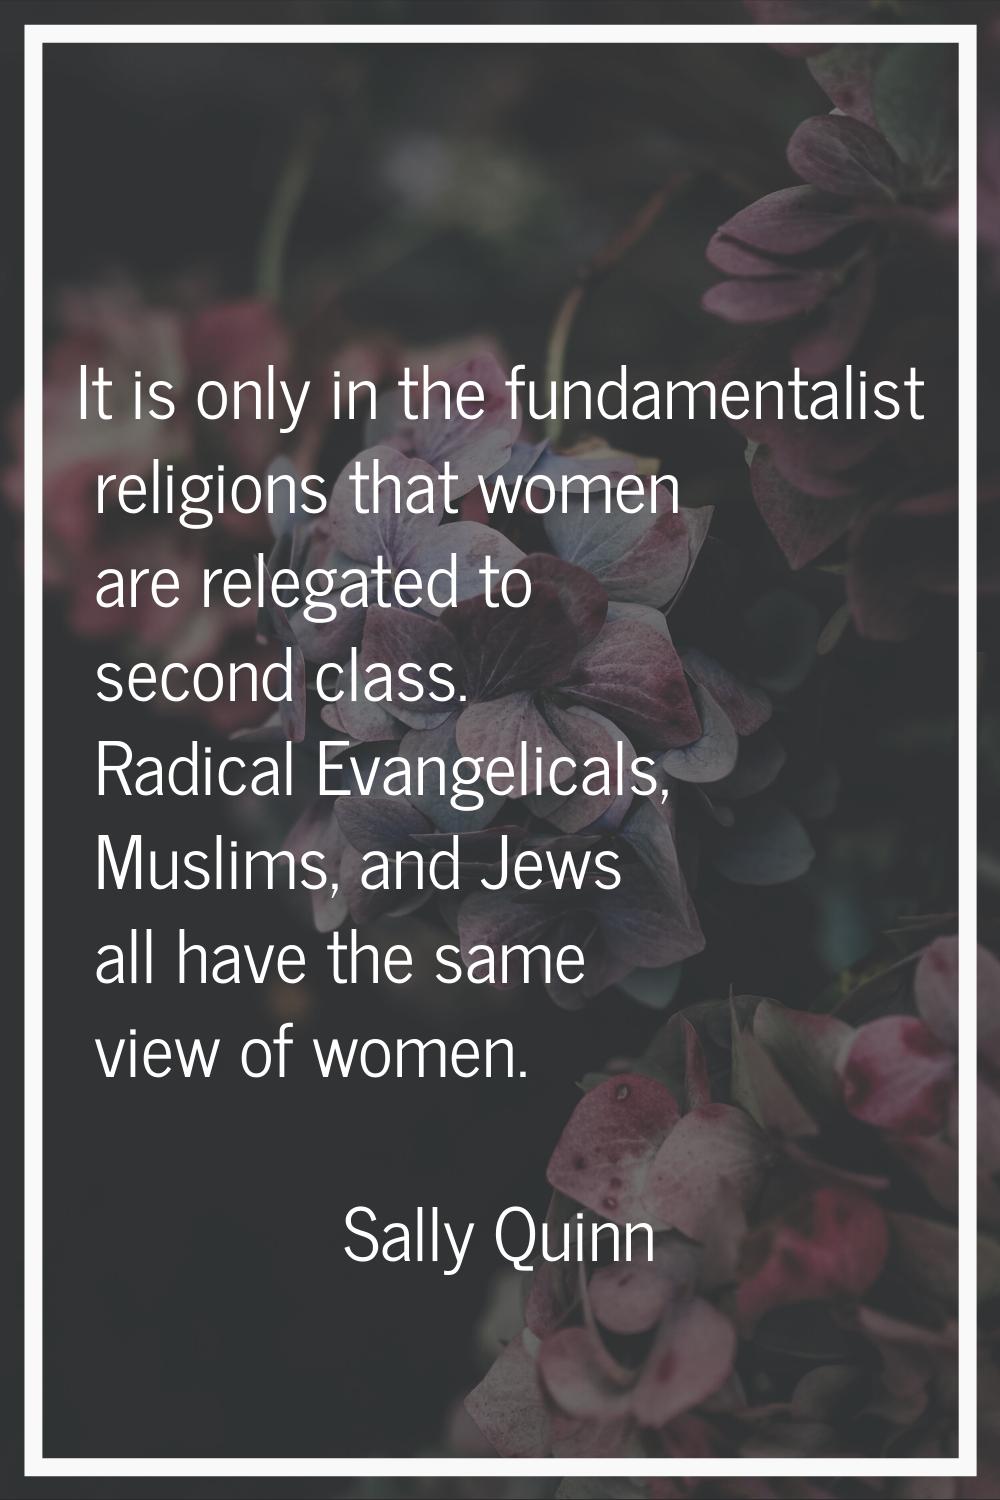 It is only in the fundamentalist religions that women are relegated to second class. Radical Evange